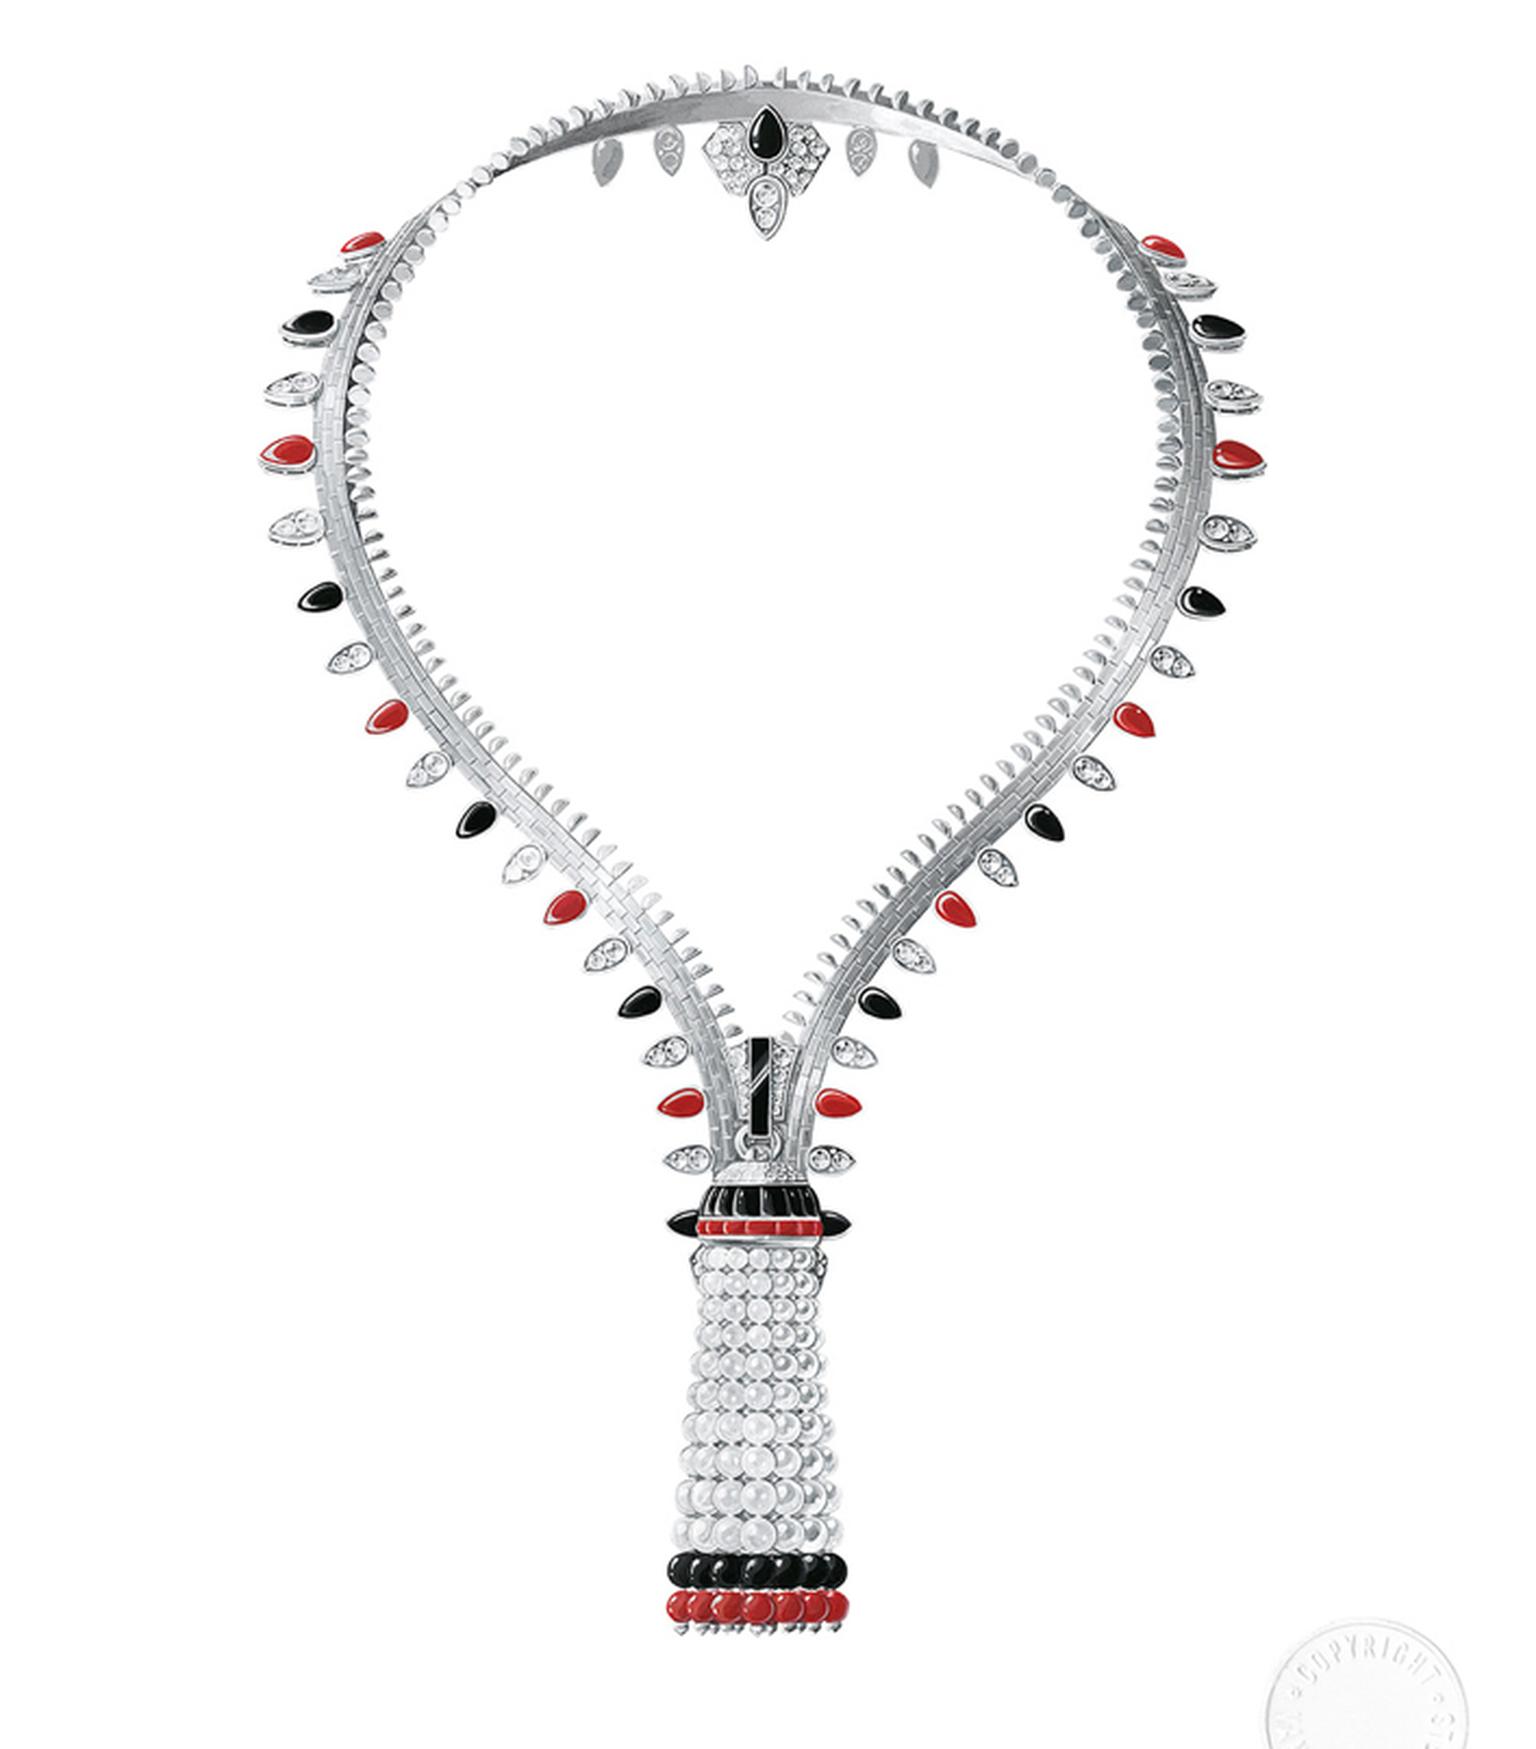 The Van Cleef & Arpels Pierres de Caractère Zip Elegance necklace is transformable into a bracelet in white gold, with round diamonds, onyx and red coral motifs and beads, and white cultured pearls